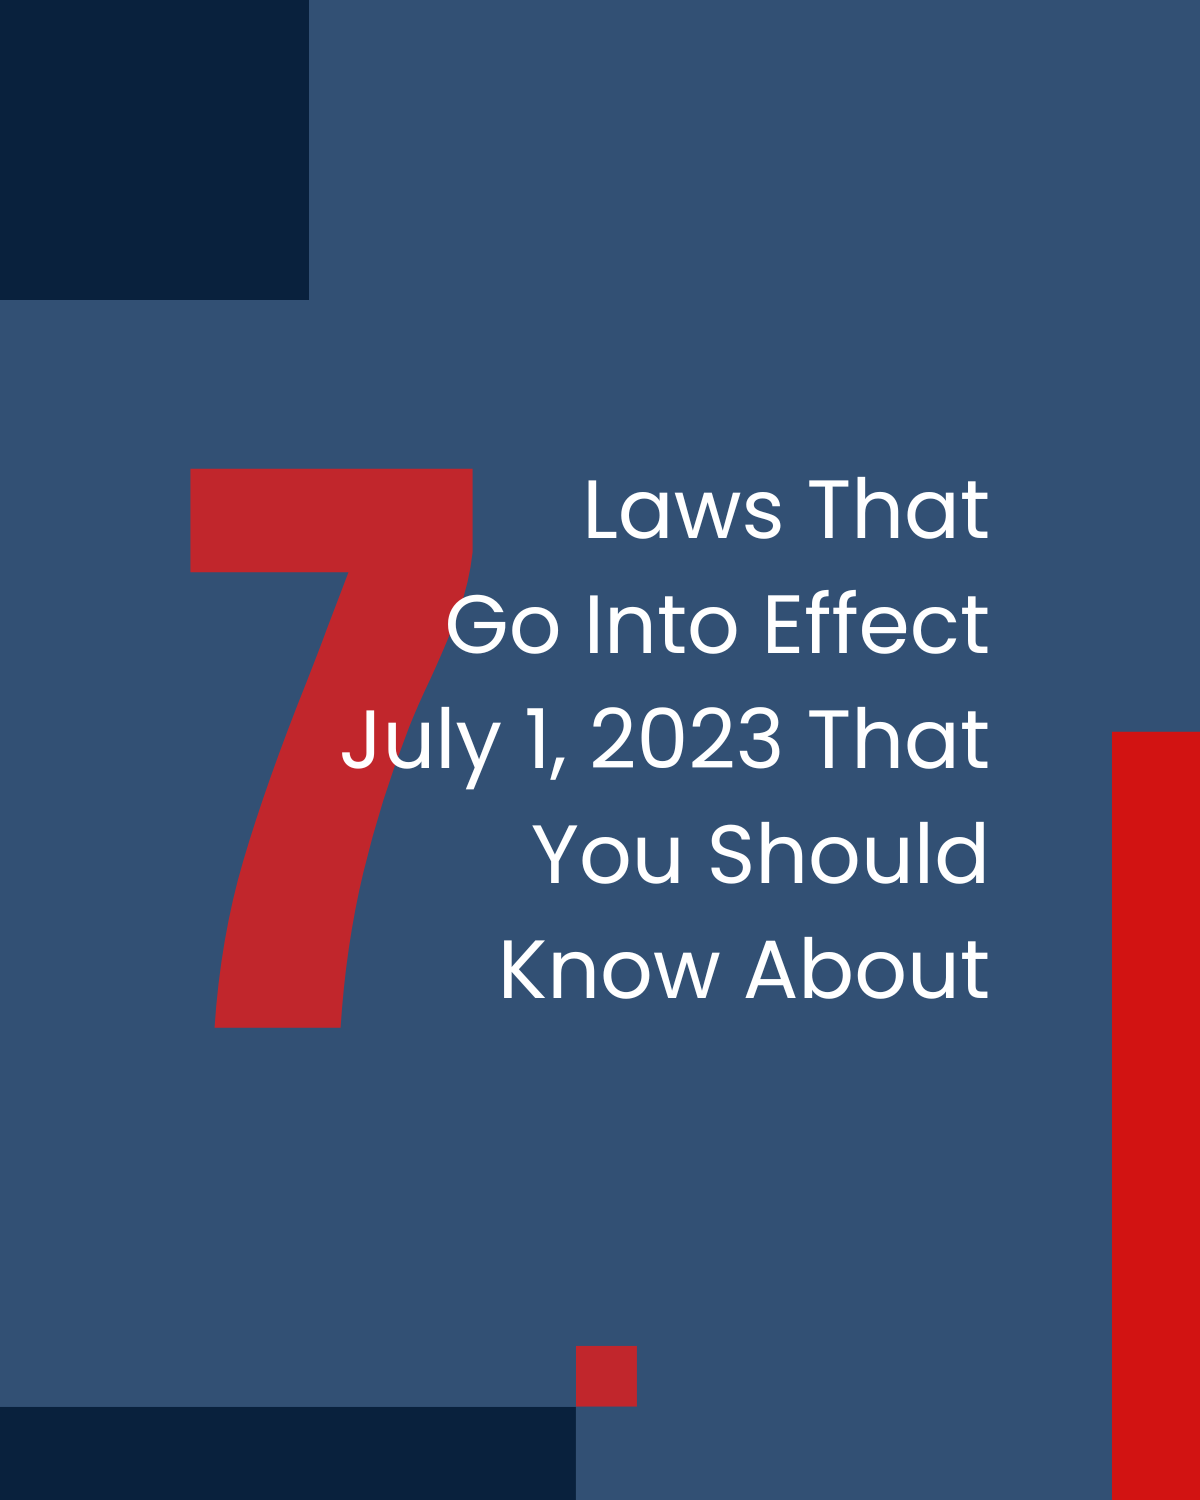 7 laws that go into effect july 1 2023 that you should know about